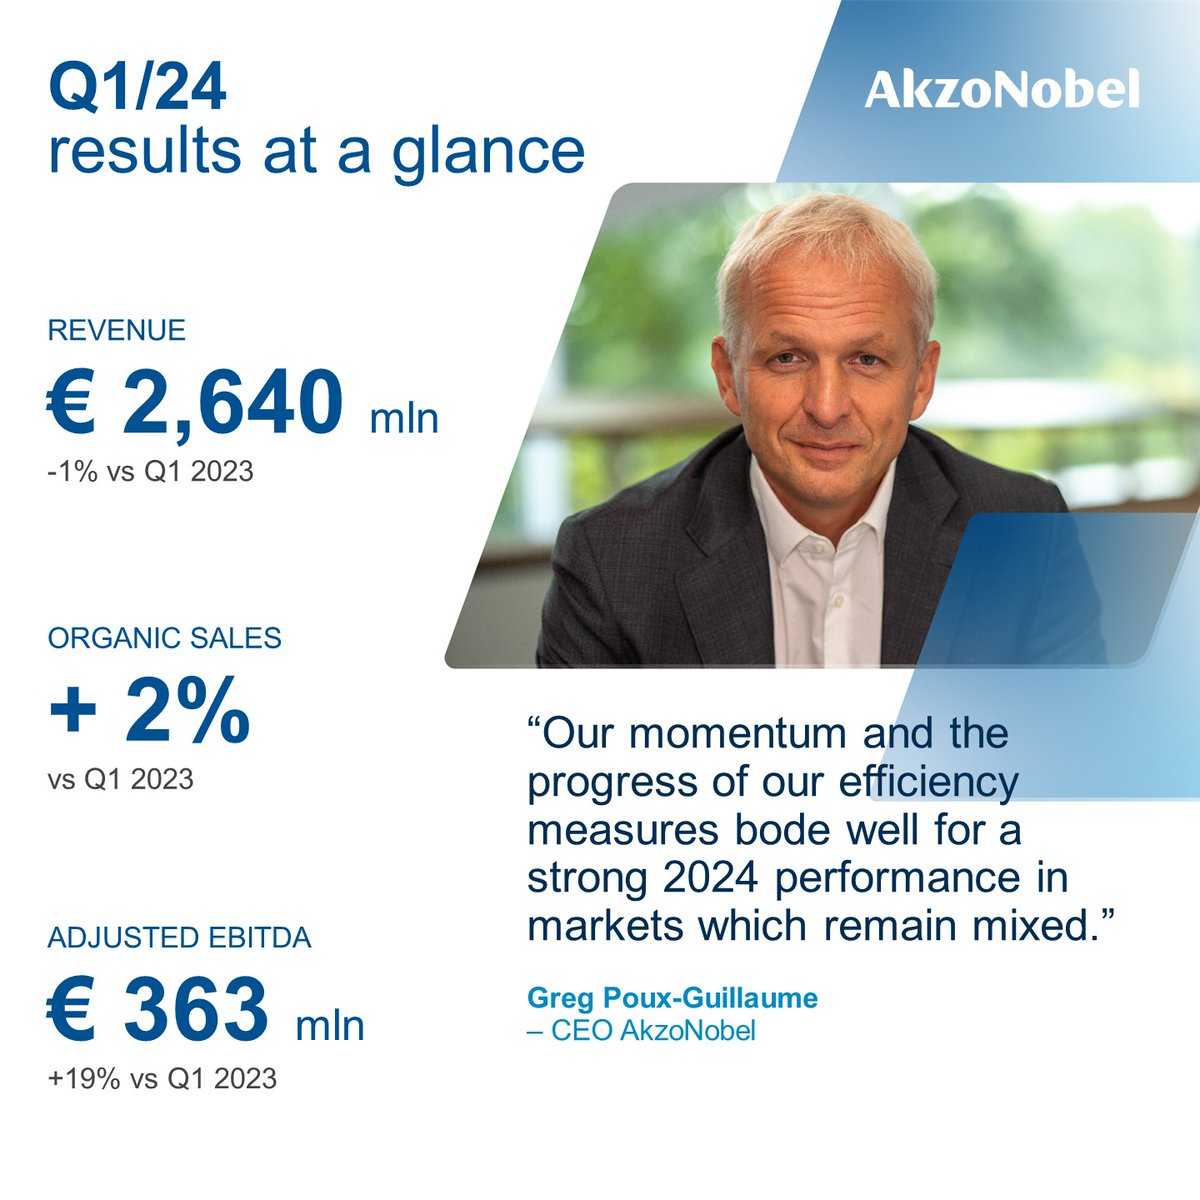 Our Q1 2024 results are now available: AkzoNobel delivers continued volume growth and margin expansion in both Paints and Coatings. Learn more: akzo.no/Q1-2024-release #FinancialResults #AkzoNobel $AKZA $AKZOY $AKZOF